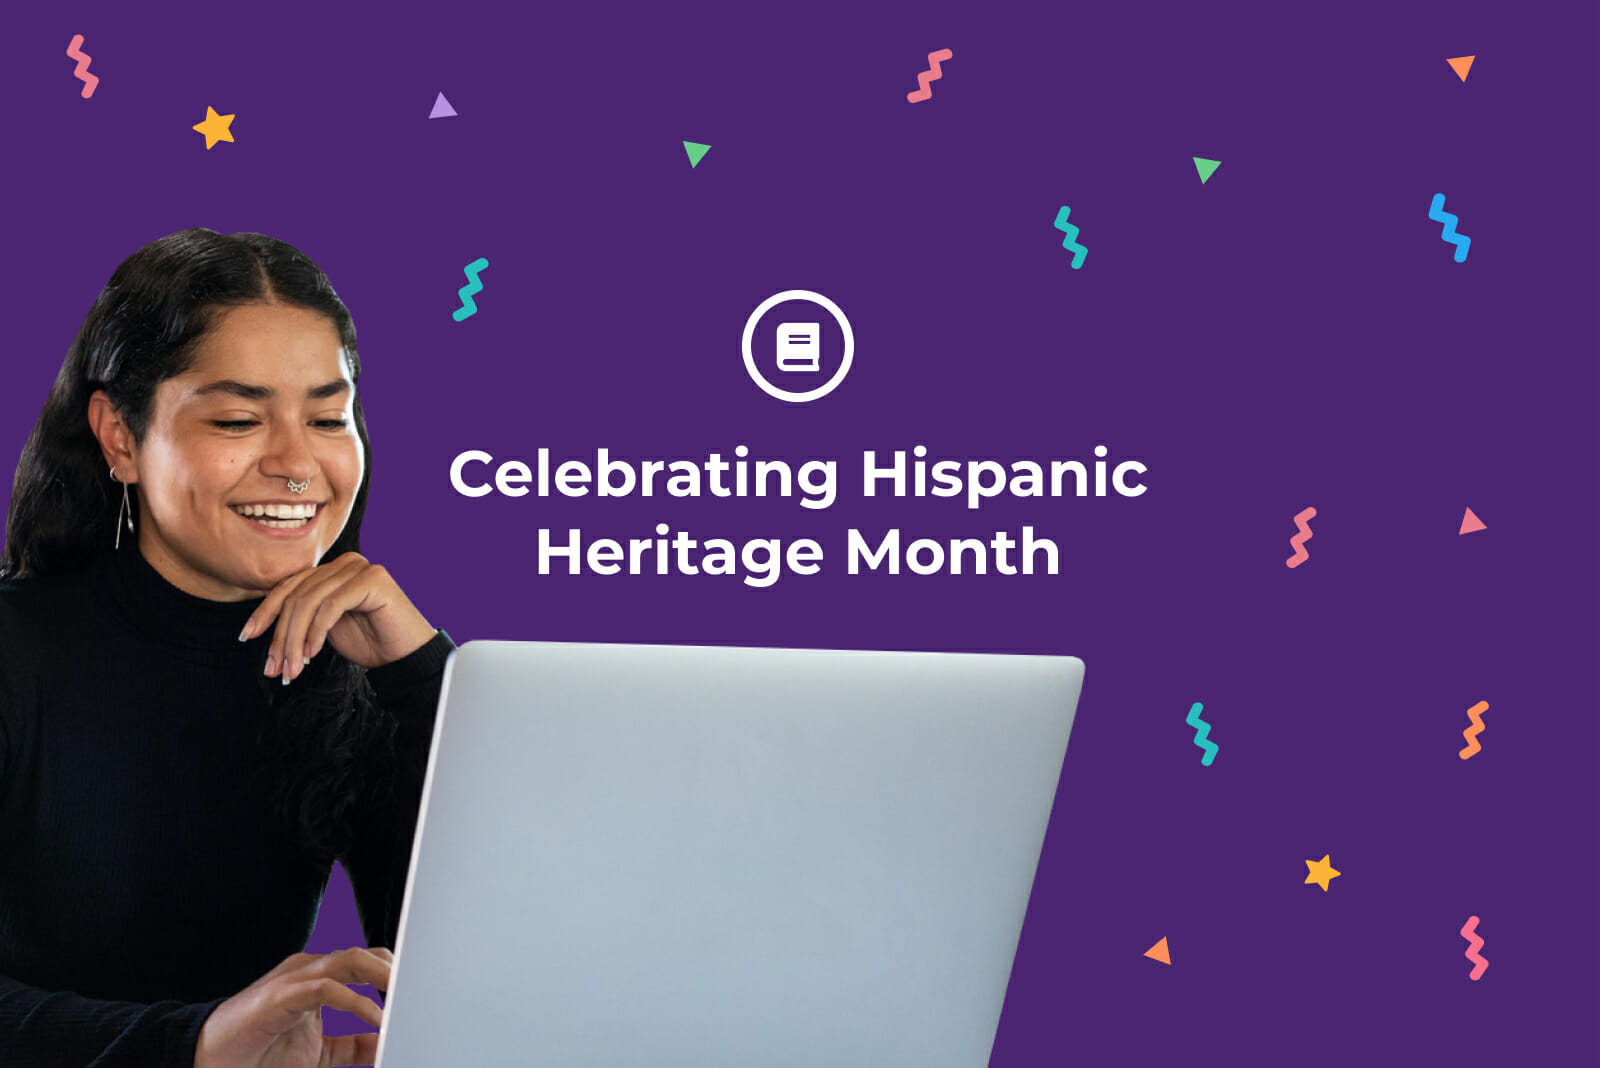 Latinx-Hispanic woman smiling as she uses a laptop in front of a purple background that says "Celebrating Hispanic Heritage Month: